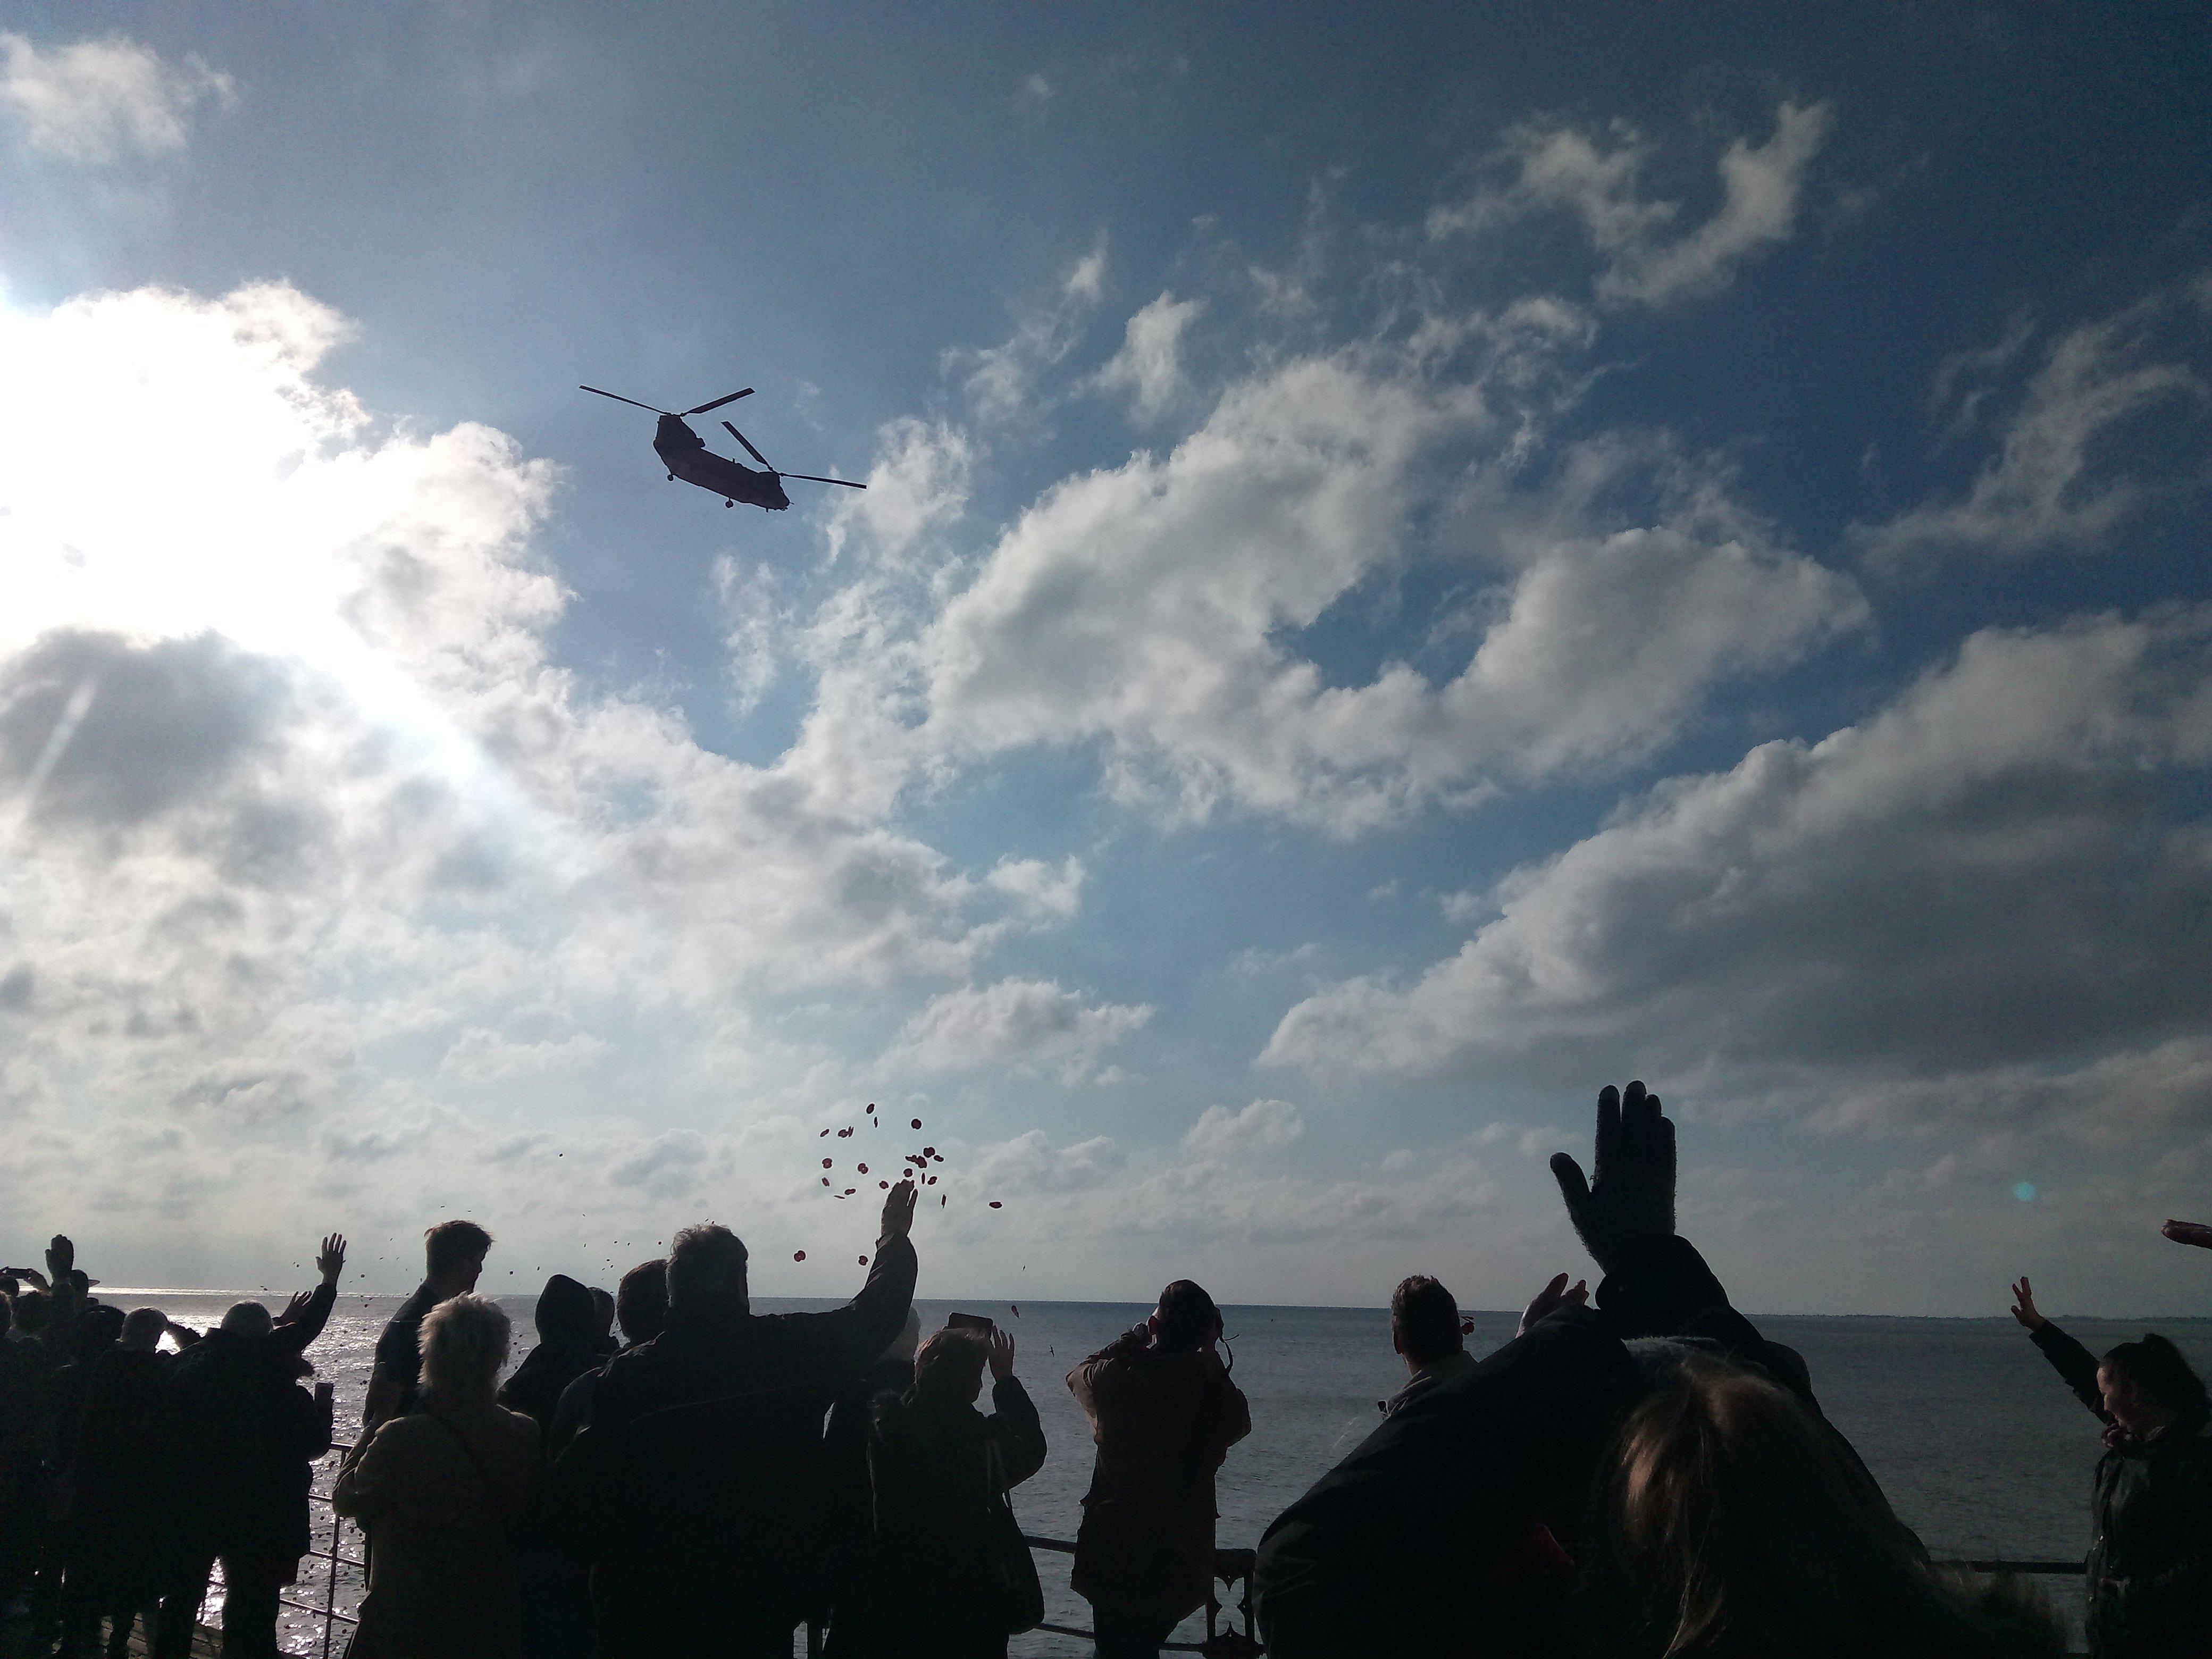 After the parade, the Air Cadets and Air Scouts, marched to the pier for a Chinook fly over